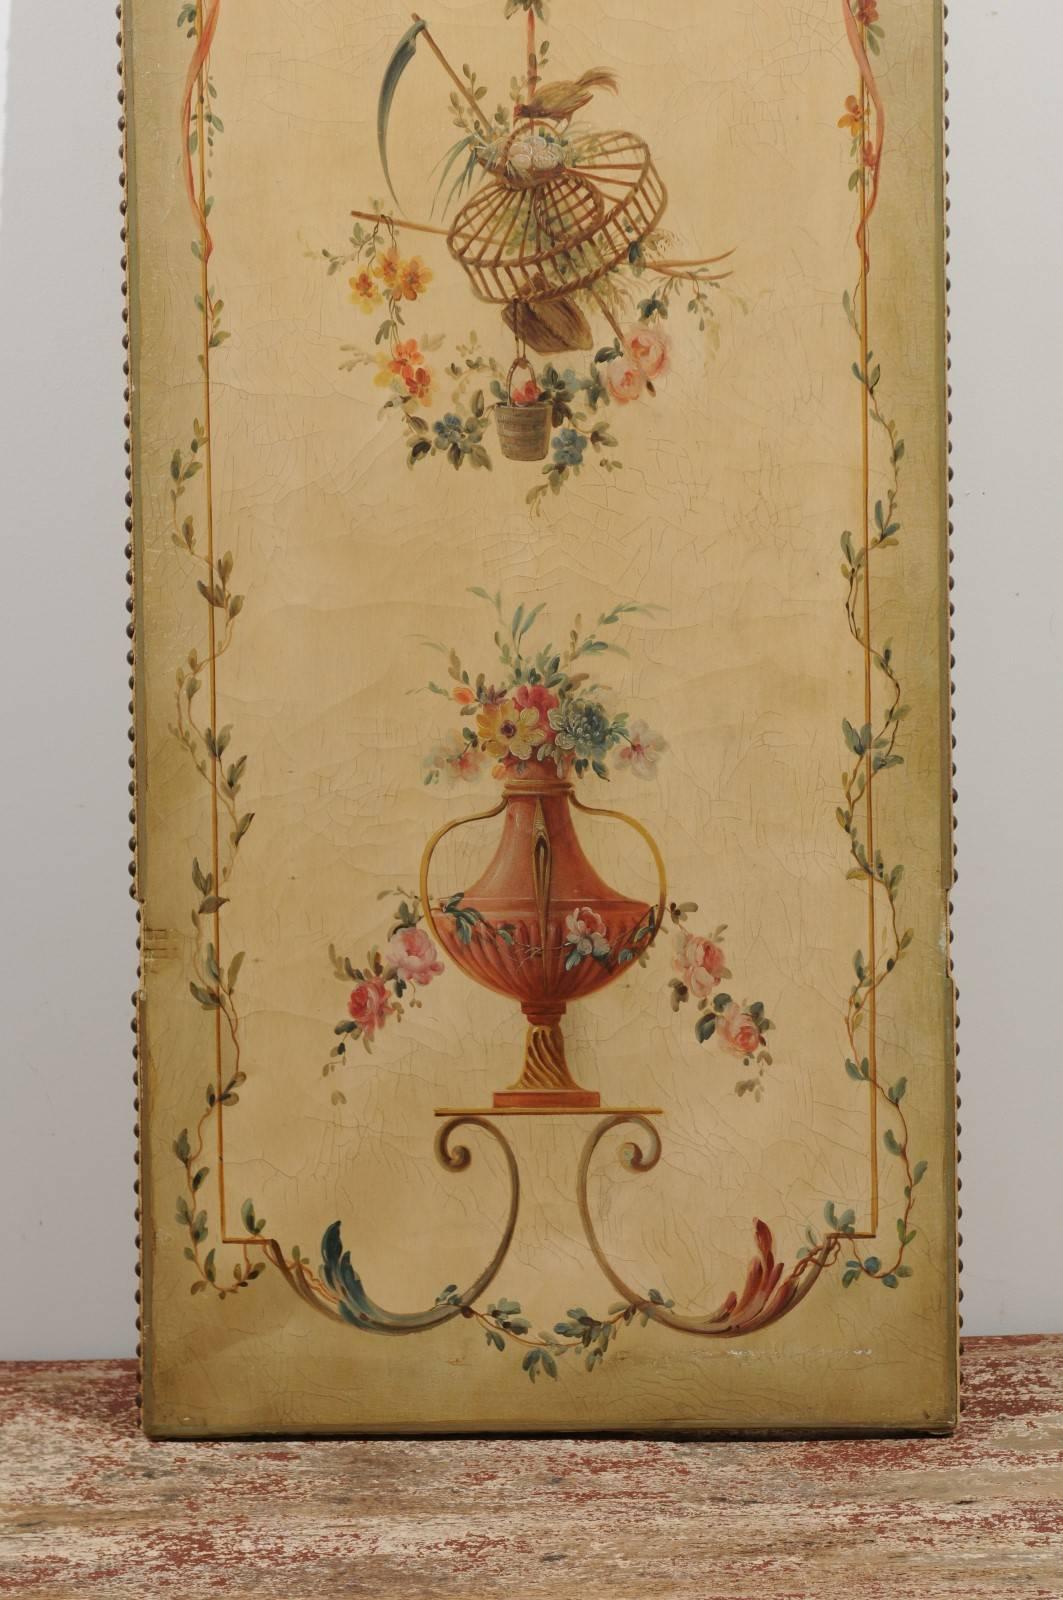 Canvas 19th Century Italian Single Decorative Panel with Cherubs and Floral Motifs